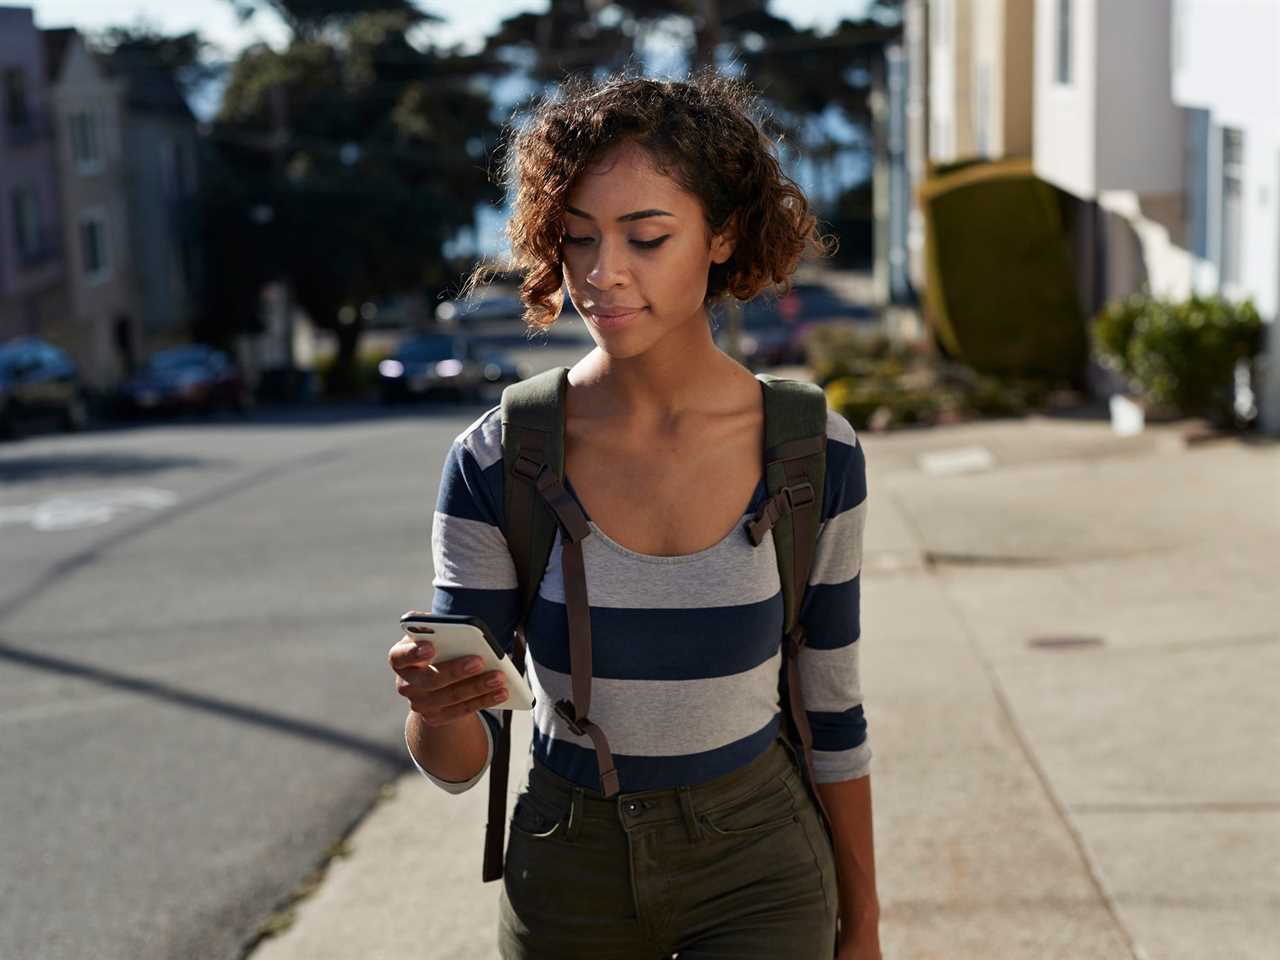 A young Gen Z person walking and looking at phone